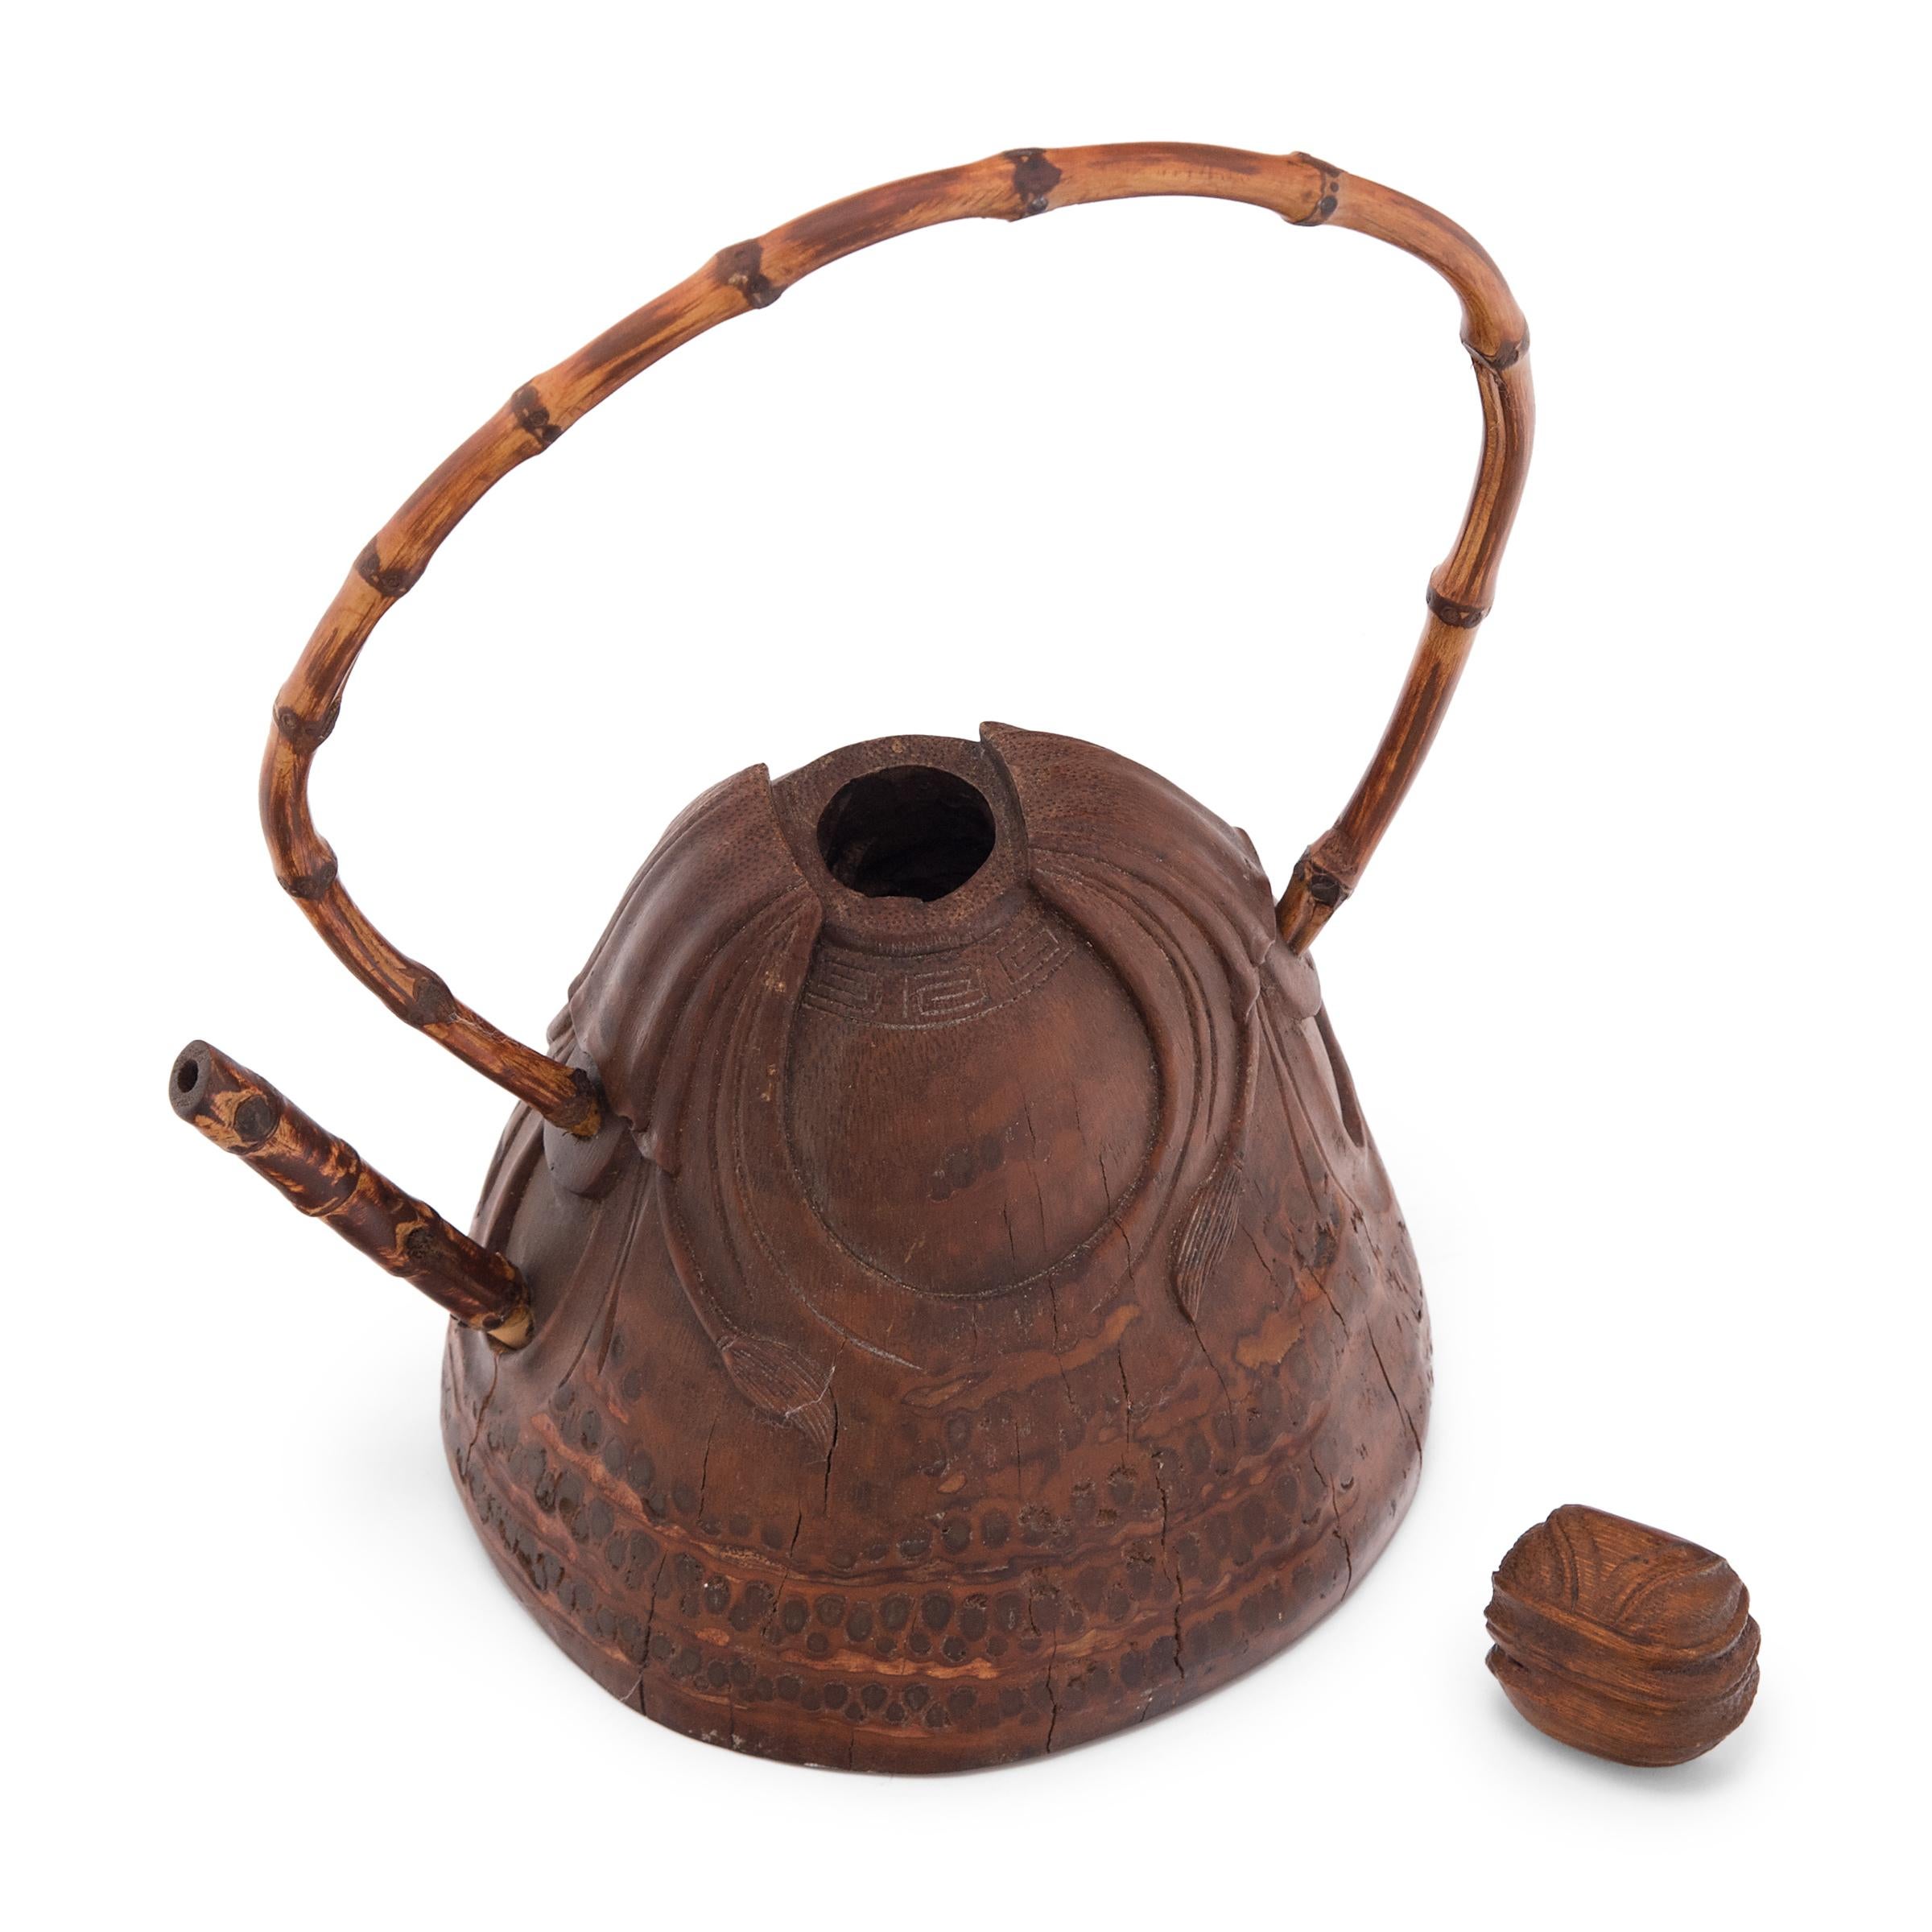 20th Century Chinese Bamboo Cloth Teapot with Arched Handle, c. 1900 For Sale